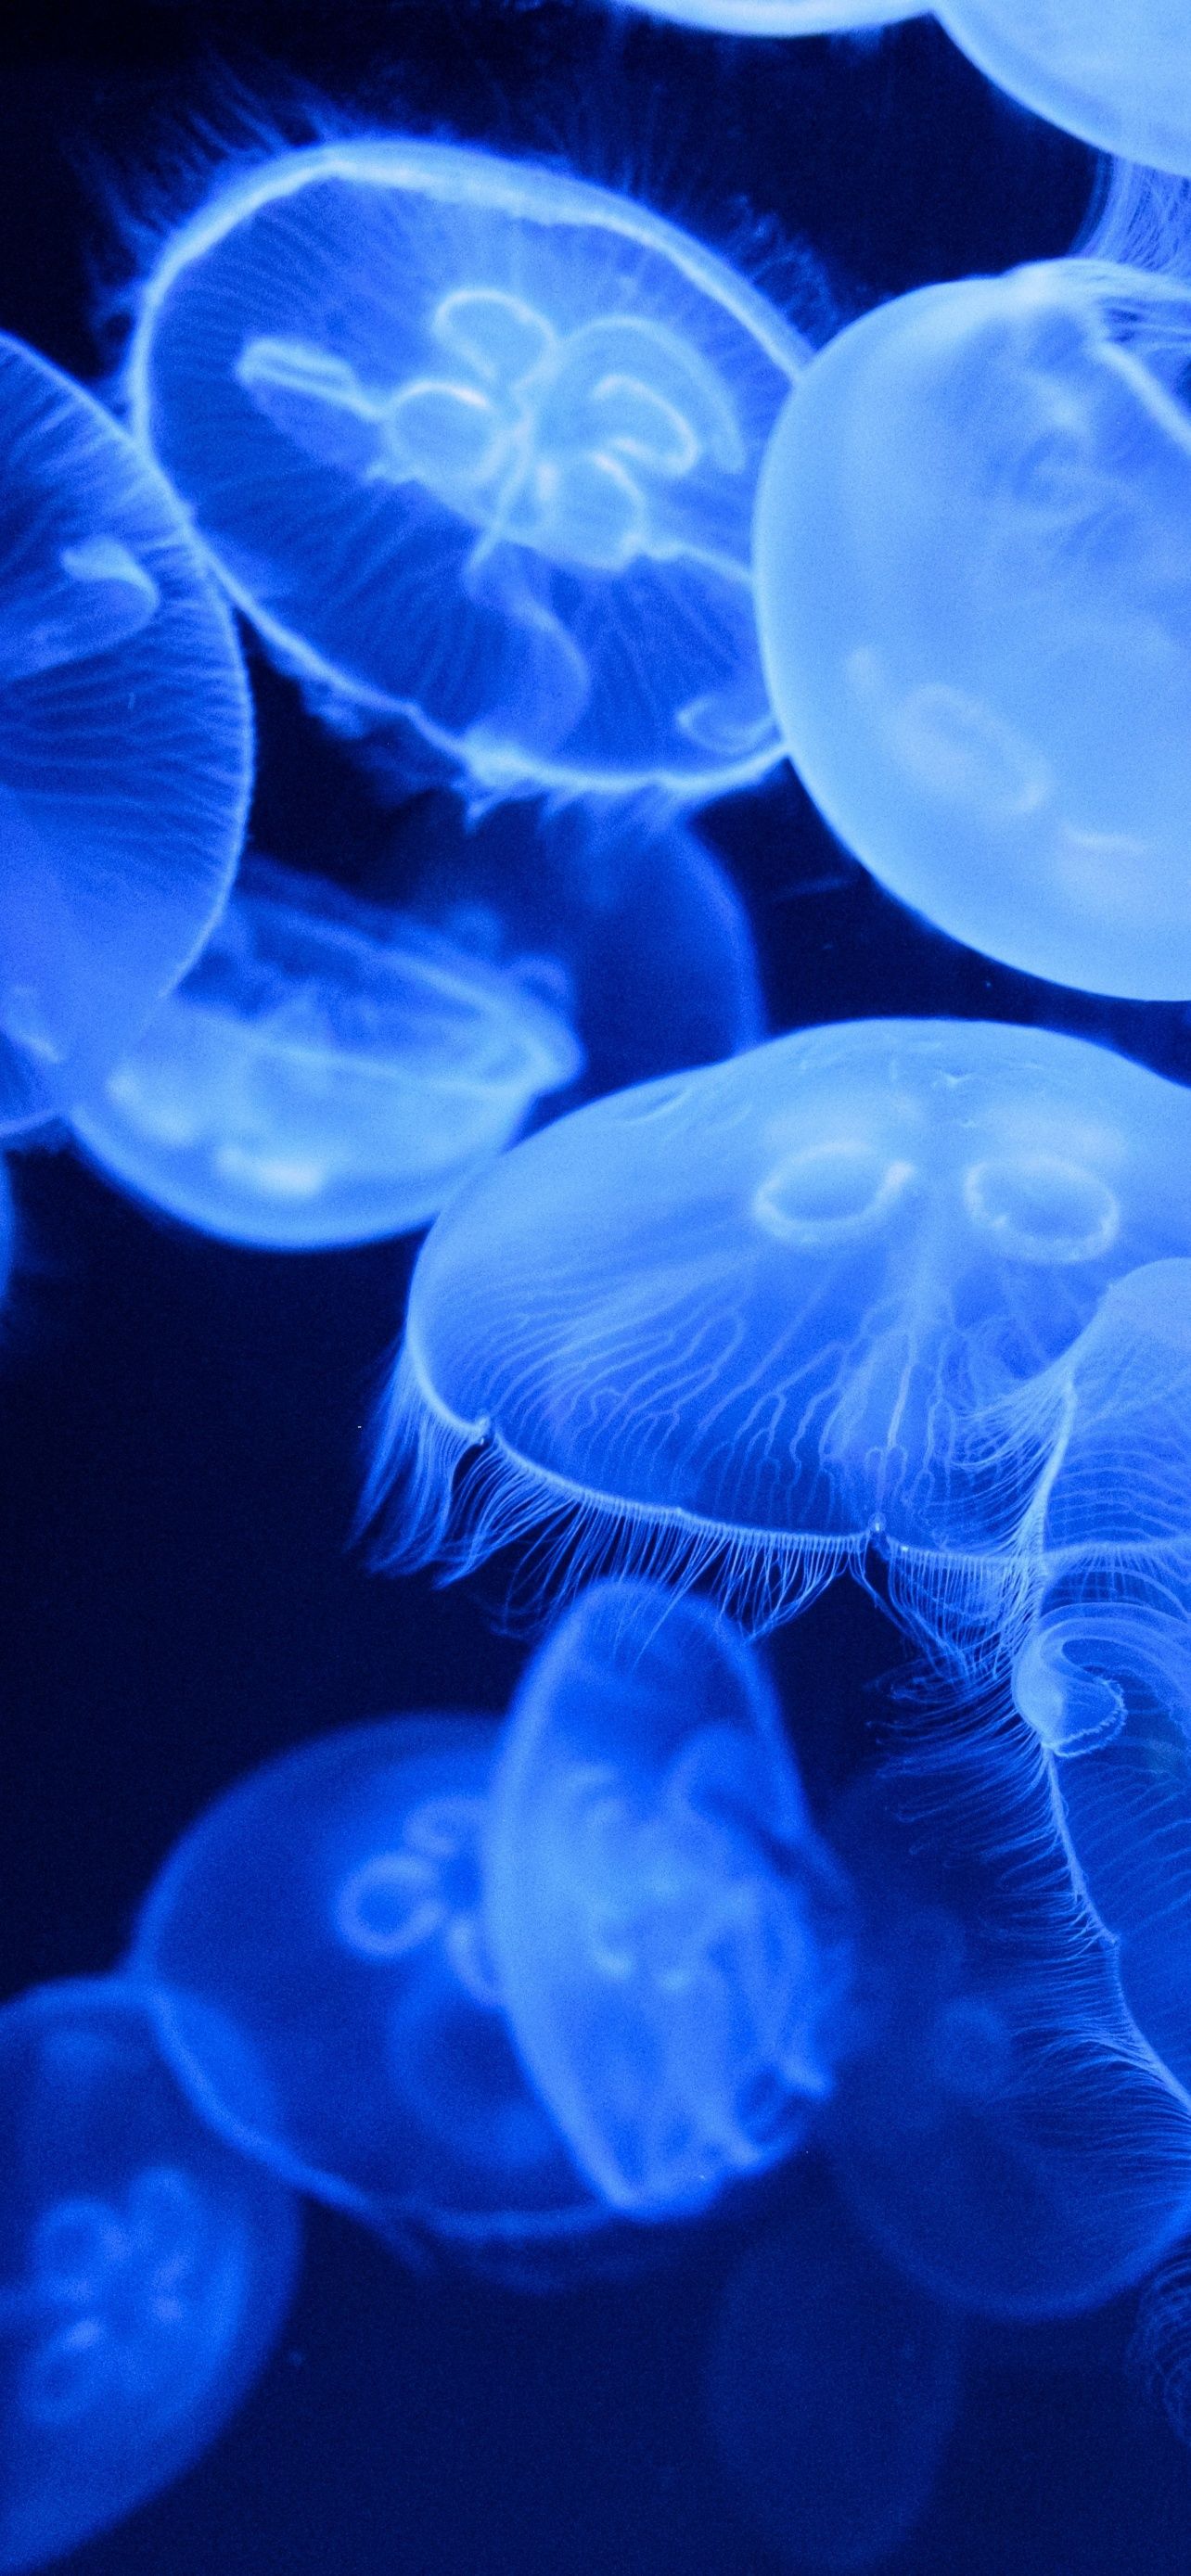 A group of jellyfish floating in the water. - Underwater, jellyfish